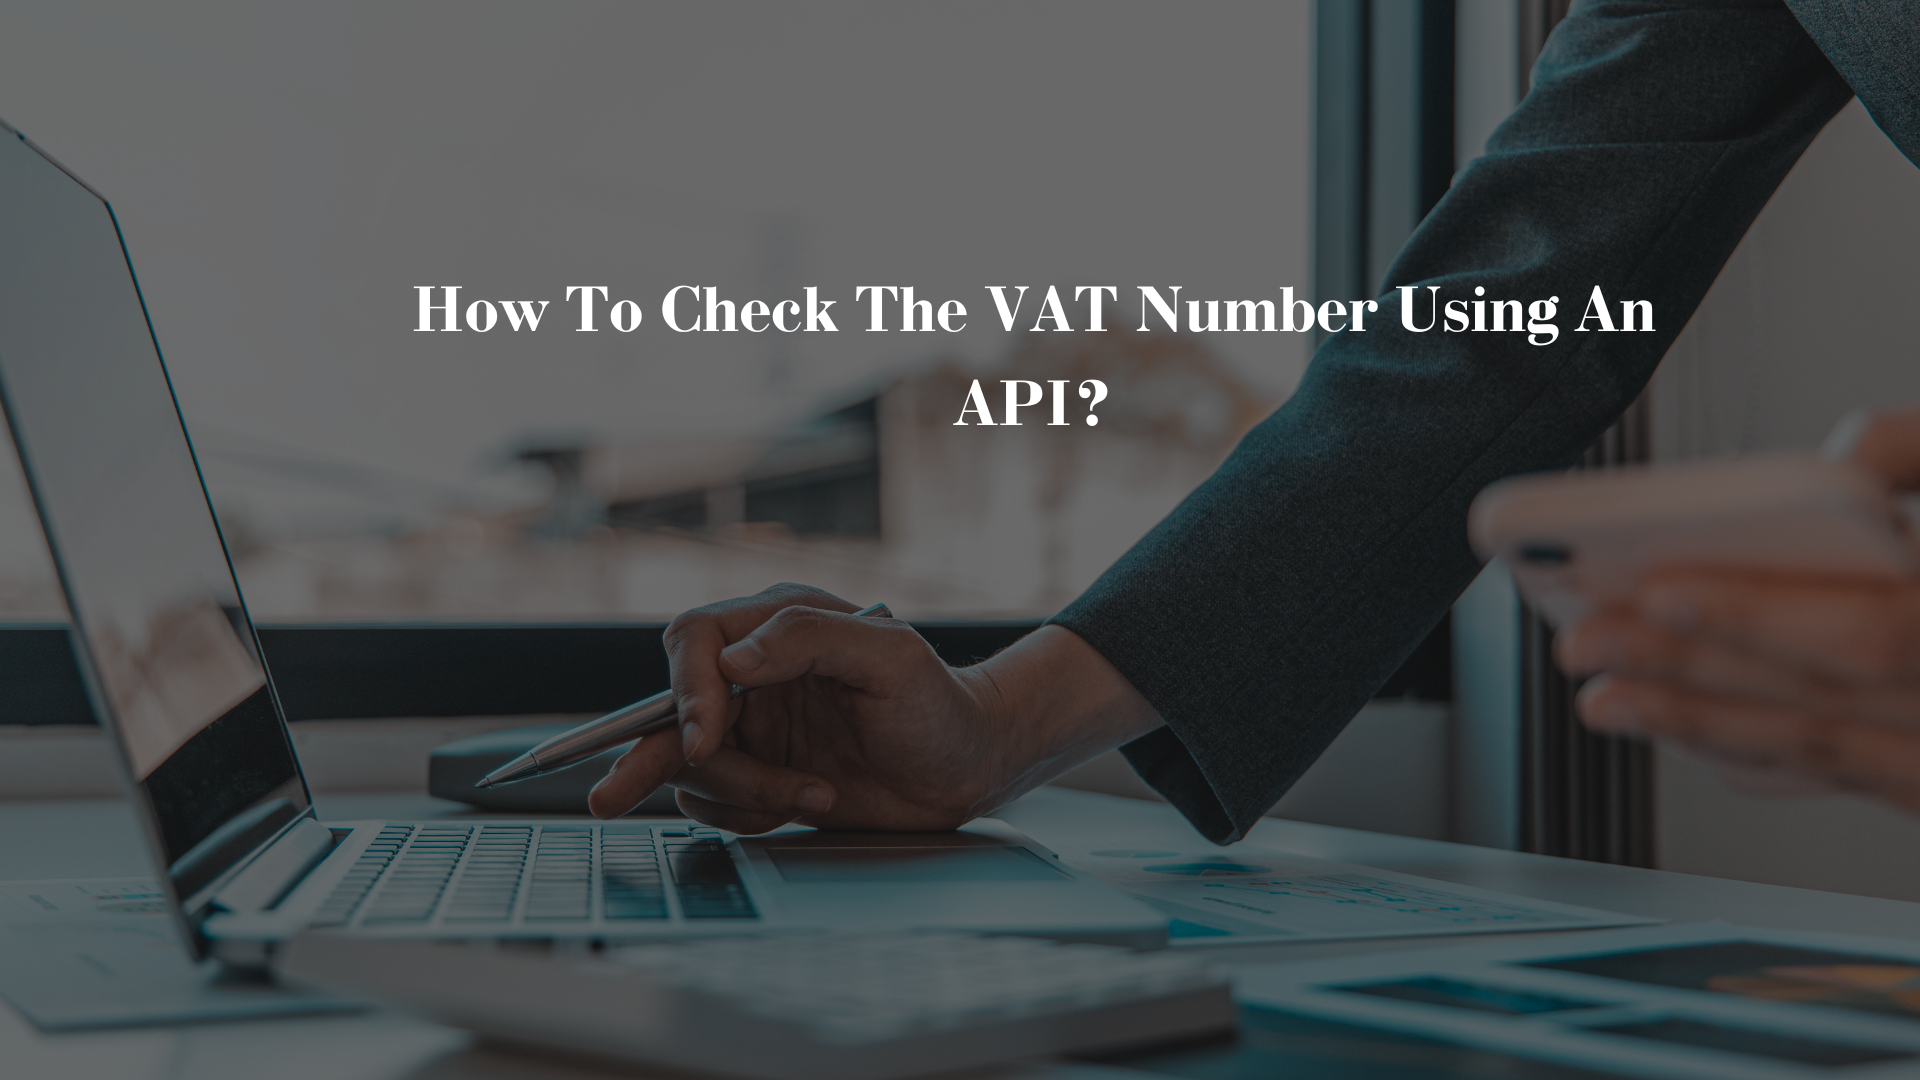 How To Check The VAT Number Using An API?